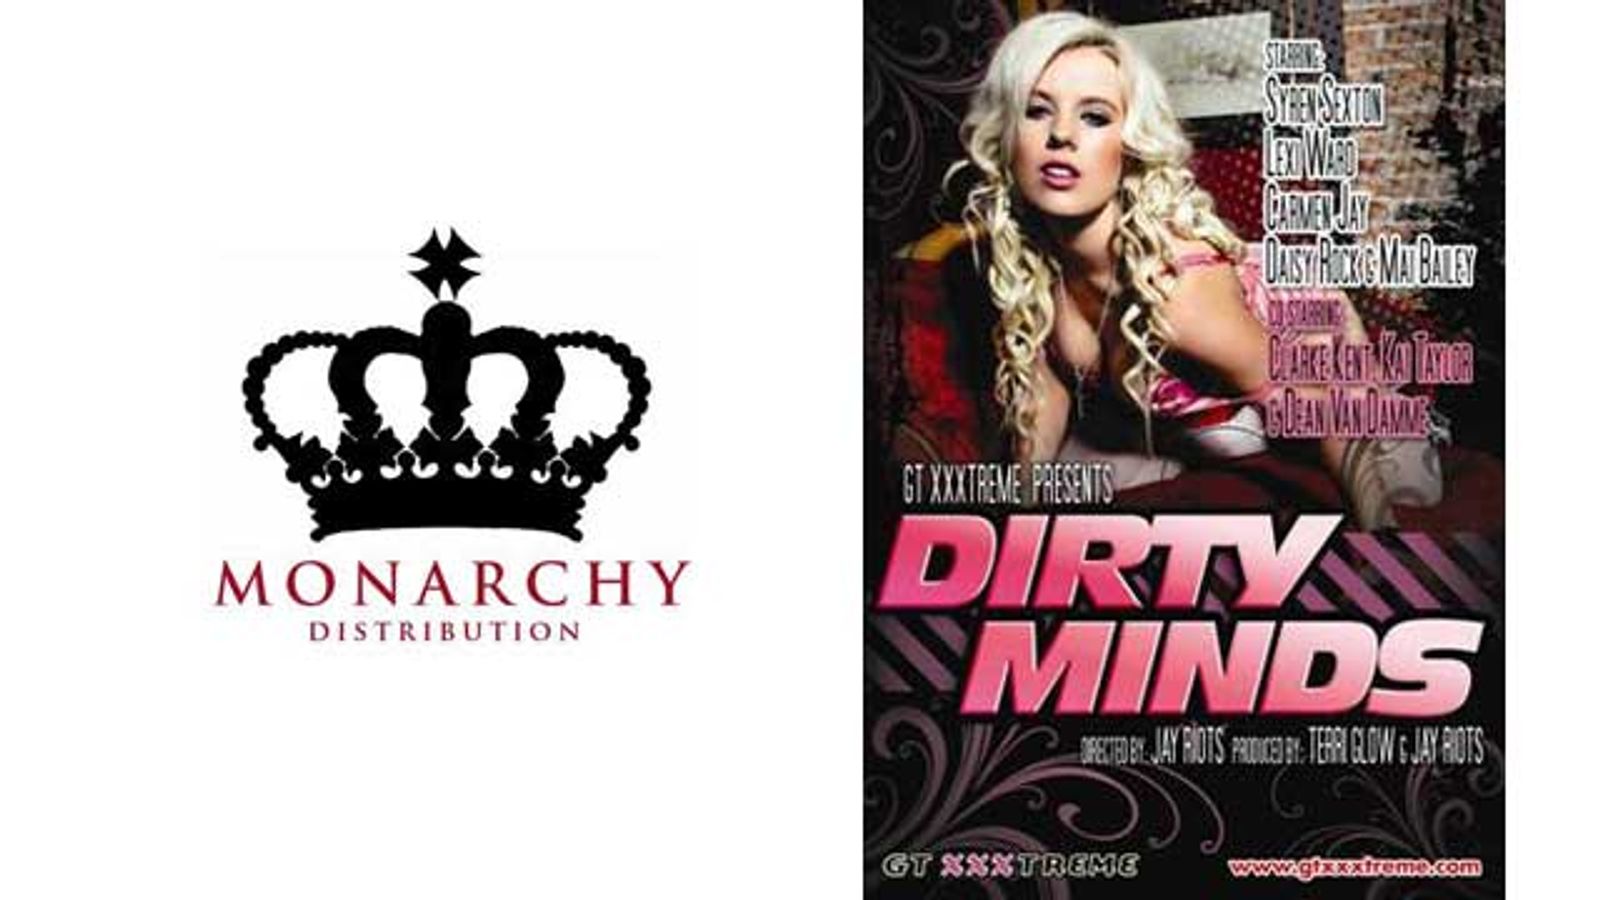 Monarchy Gets Dirty With GT XXXTREME Films' 'Dirty Minds'